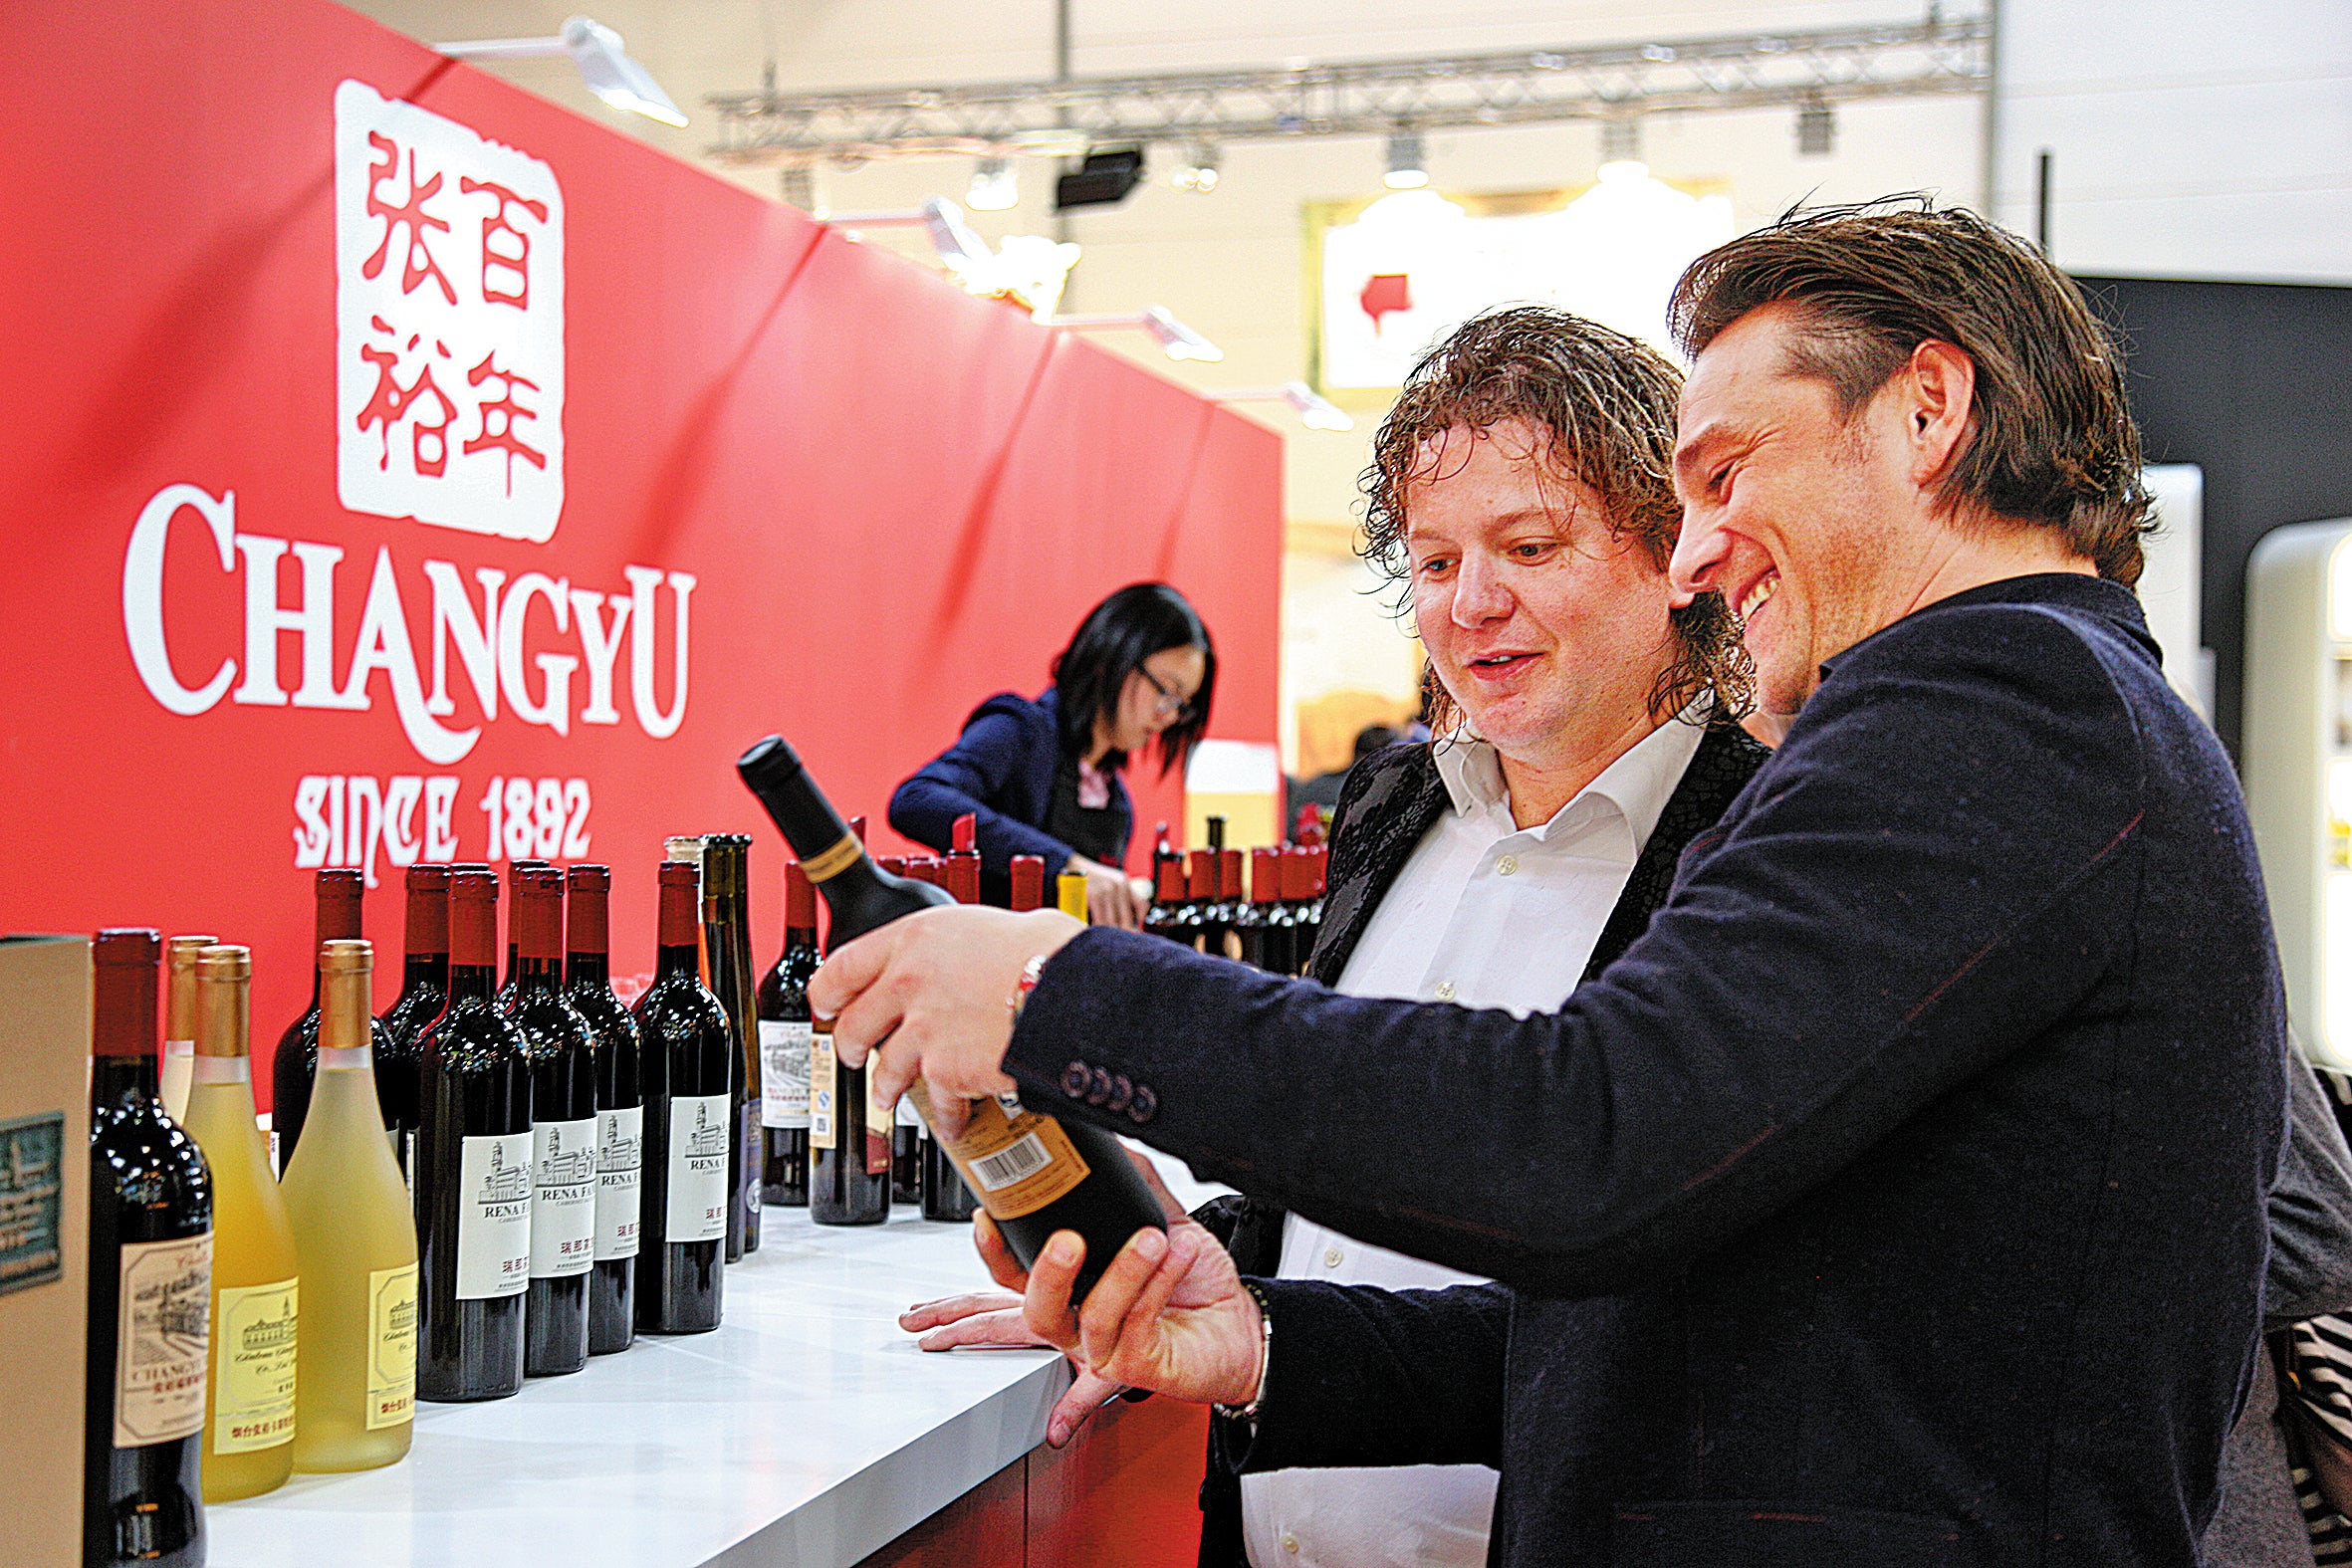 Visitors to the global ProWein show in Dusseldorf, Germany, in 2016, examine products from the Changyu Wine Group